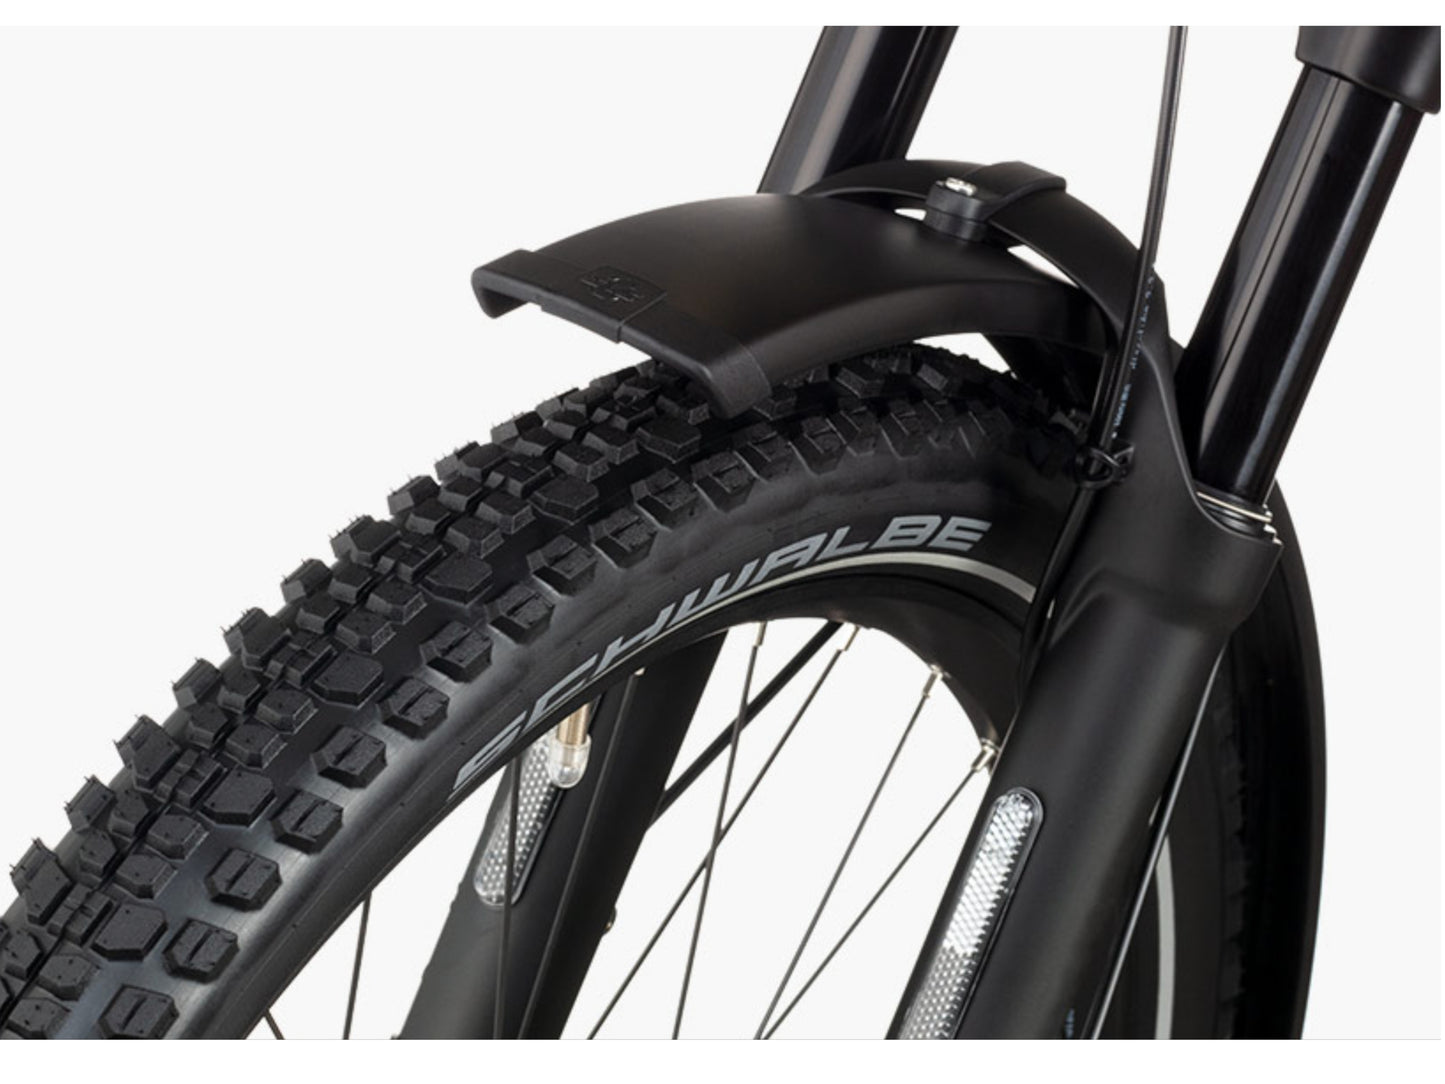 Riese and Muller Supercharger GT Touring emtb hardtail close up gx option